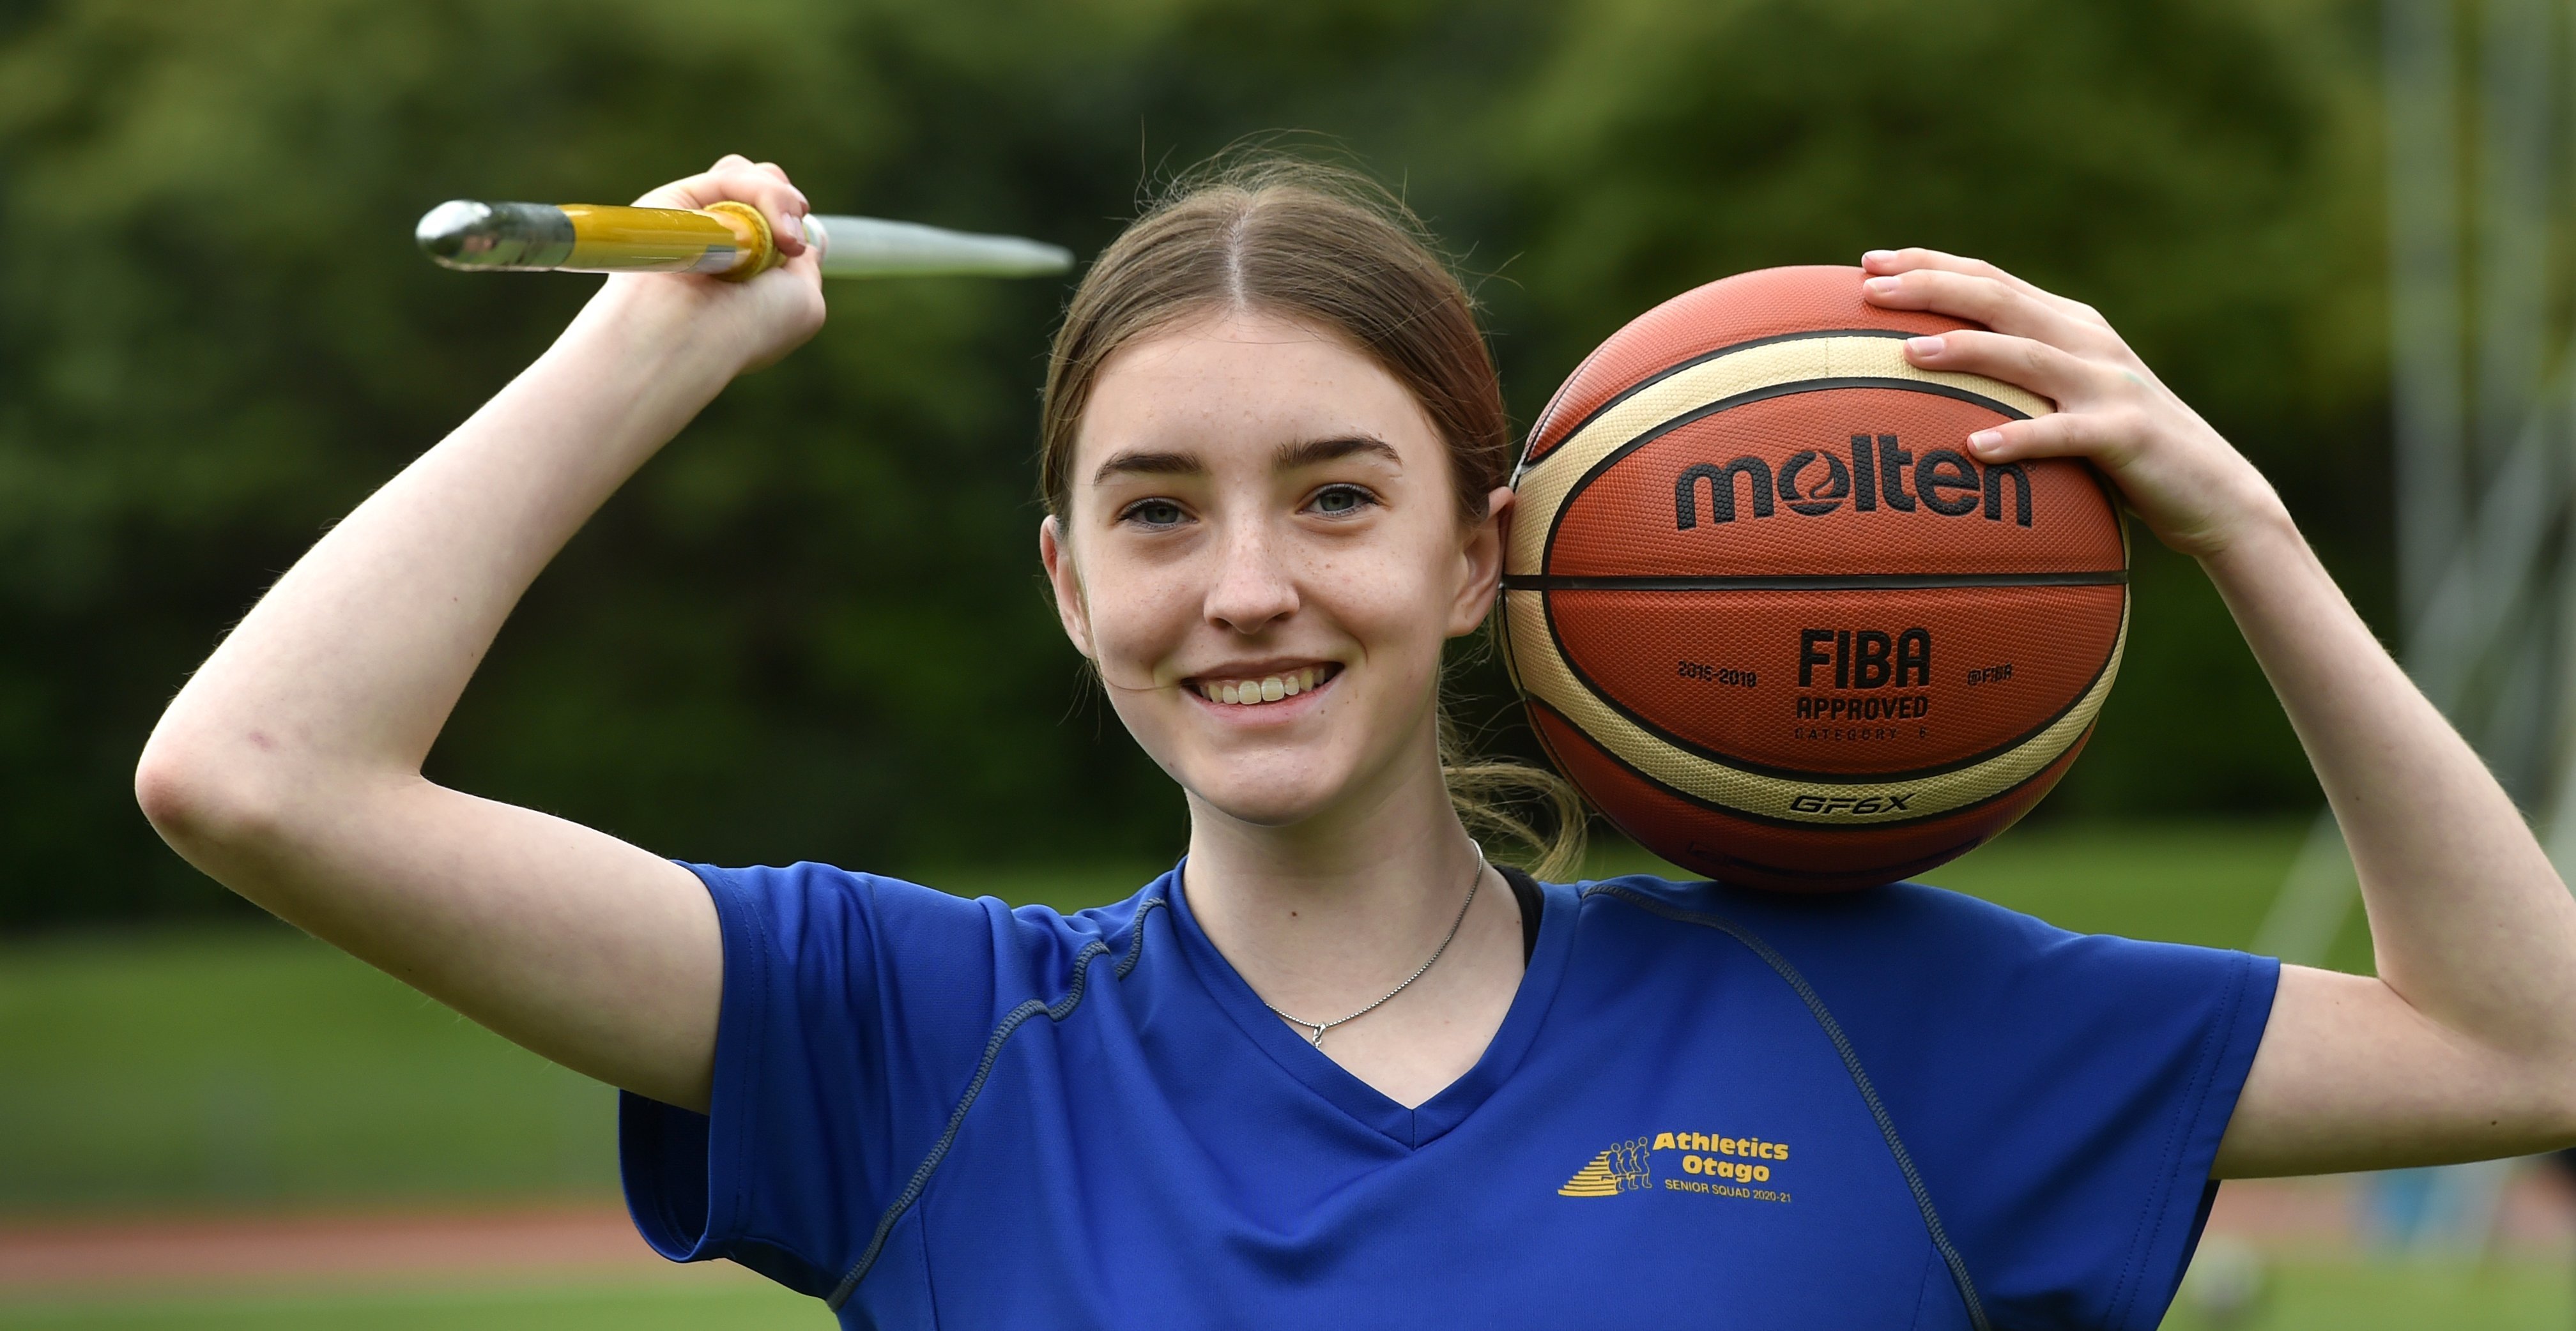 Alexa Duff (14) at the Caledonian Ground on Thursday, having represented New Zealand at a global...